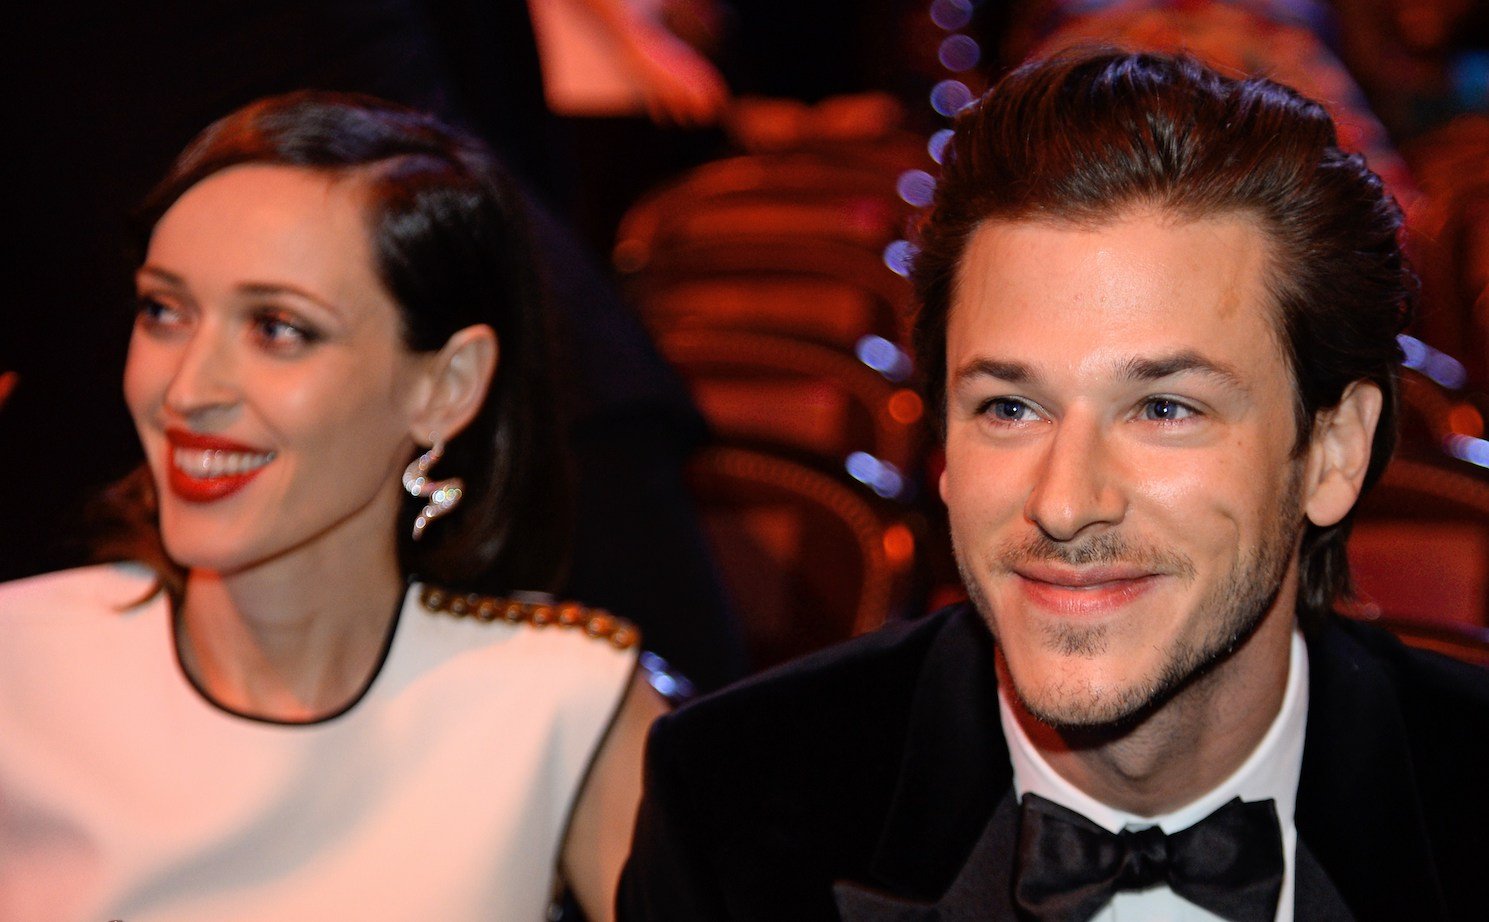 Gaspard Ulliel (R) and partner Gaëlle Piétri sitting next to each other at an awards show